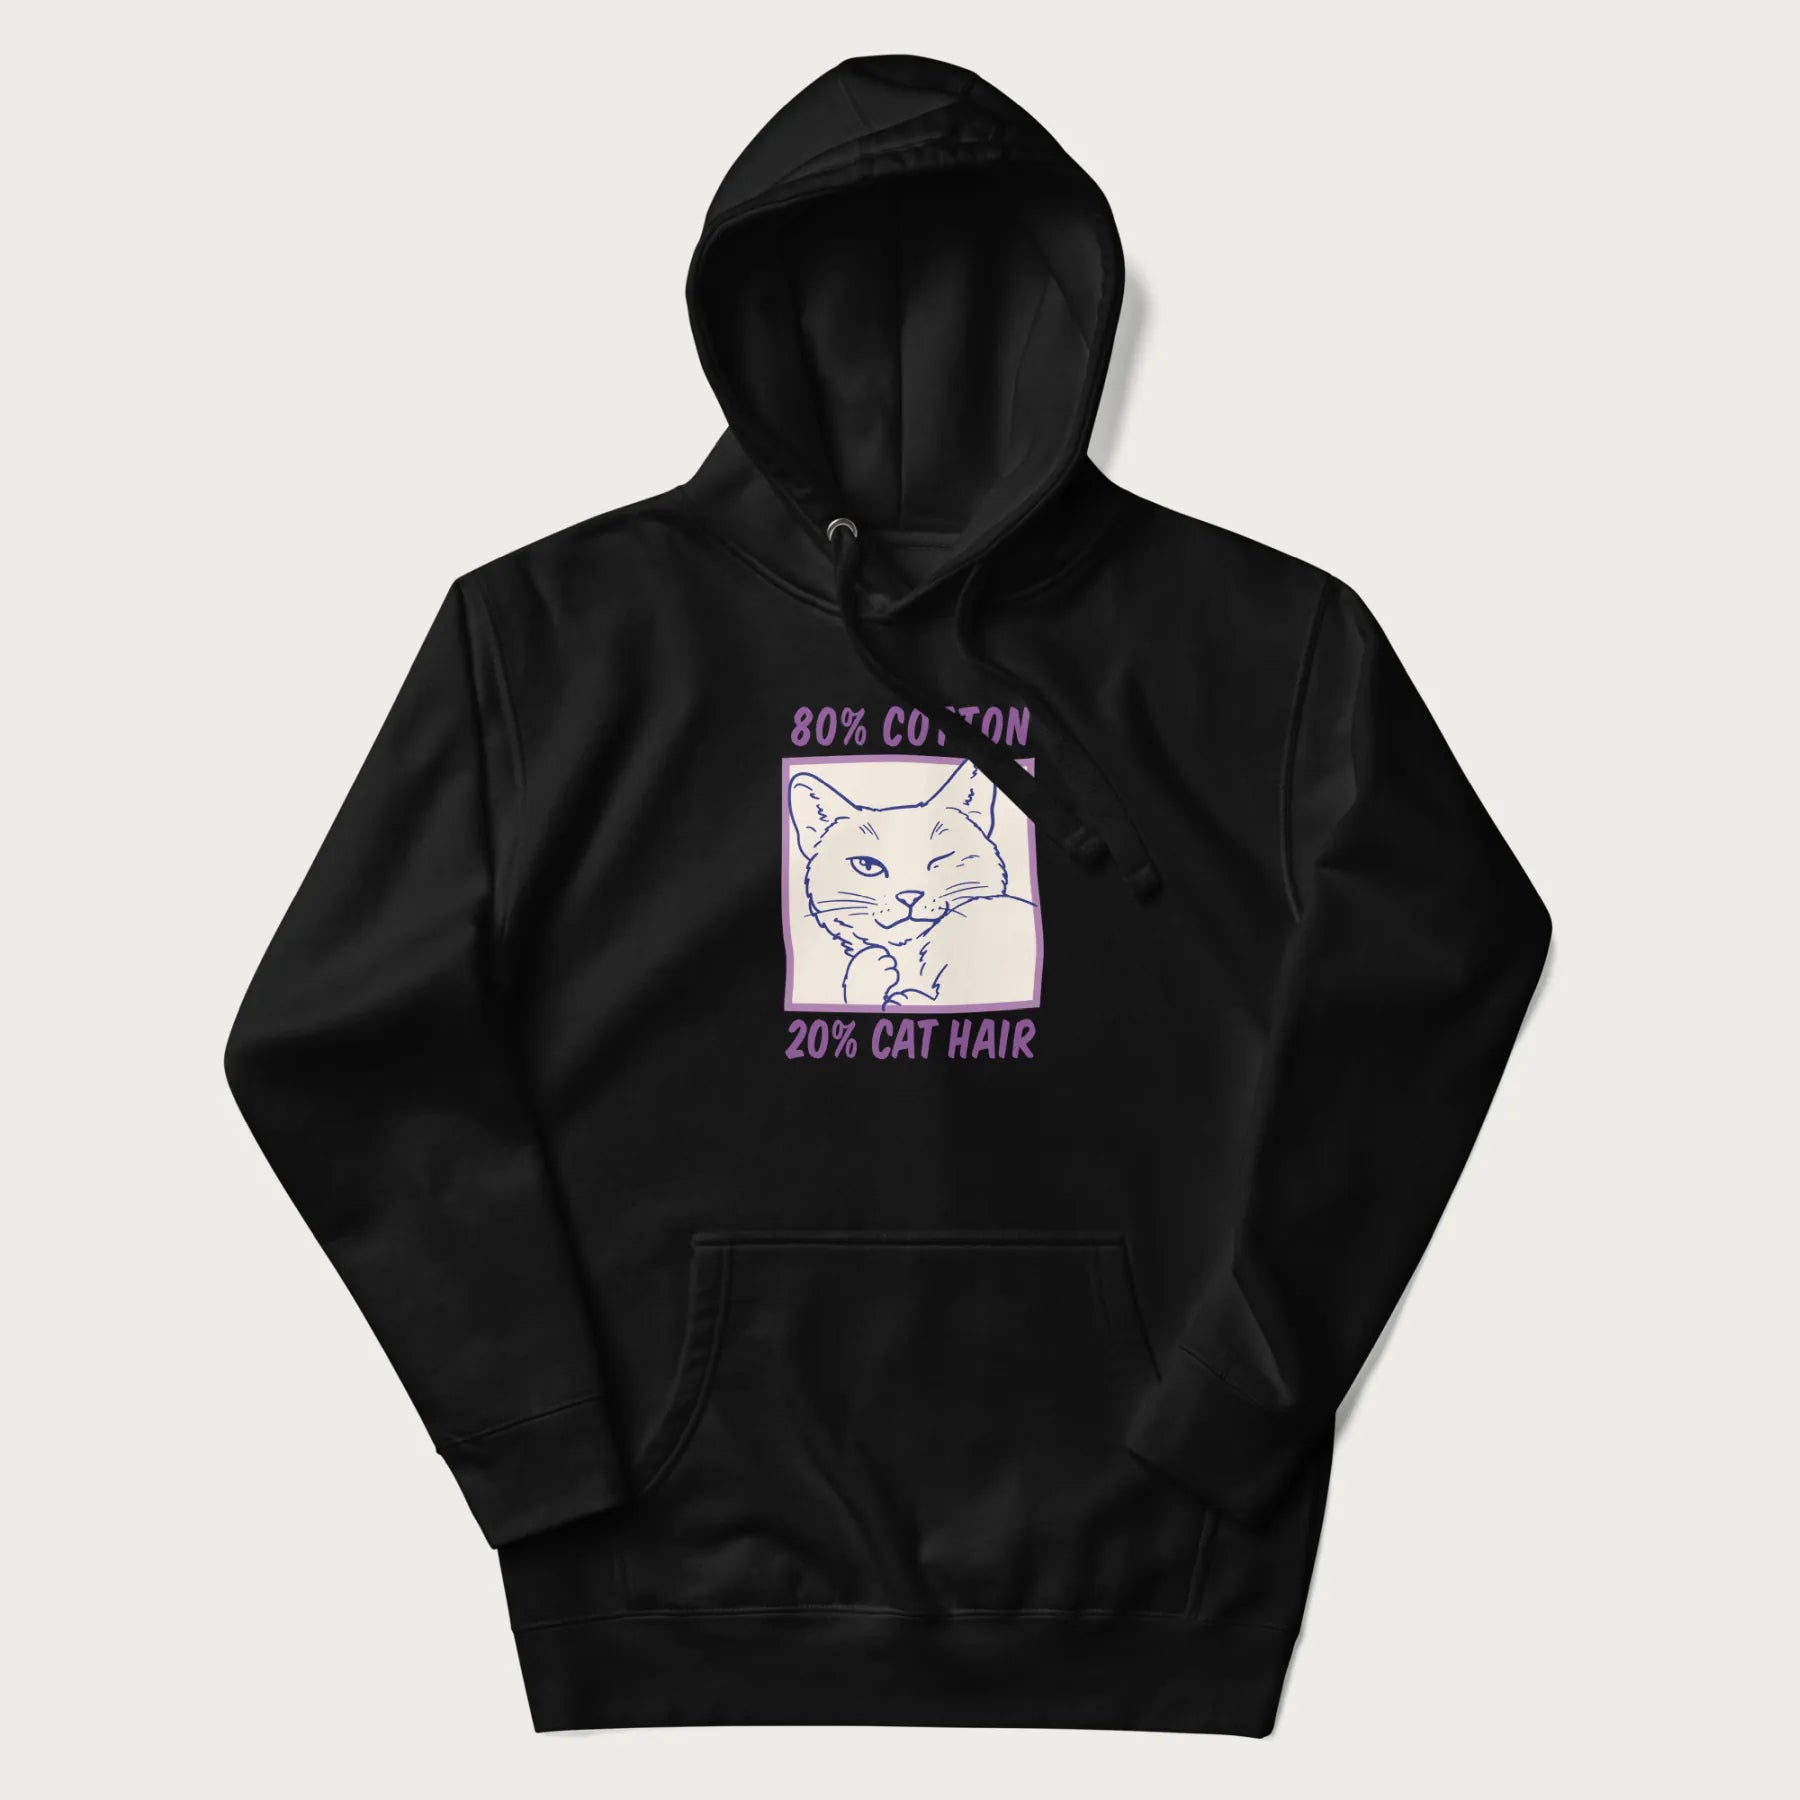 Black hoodie with graphic of a winking cat with the text "80% cotton 20% cat hair".